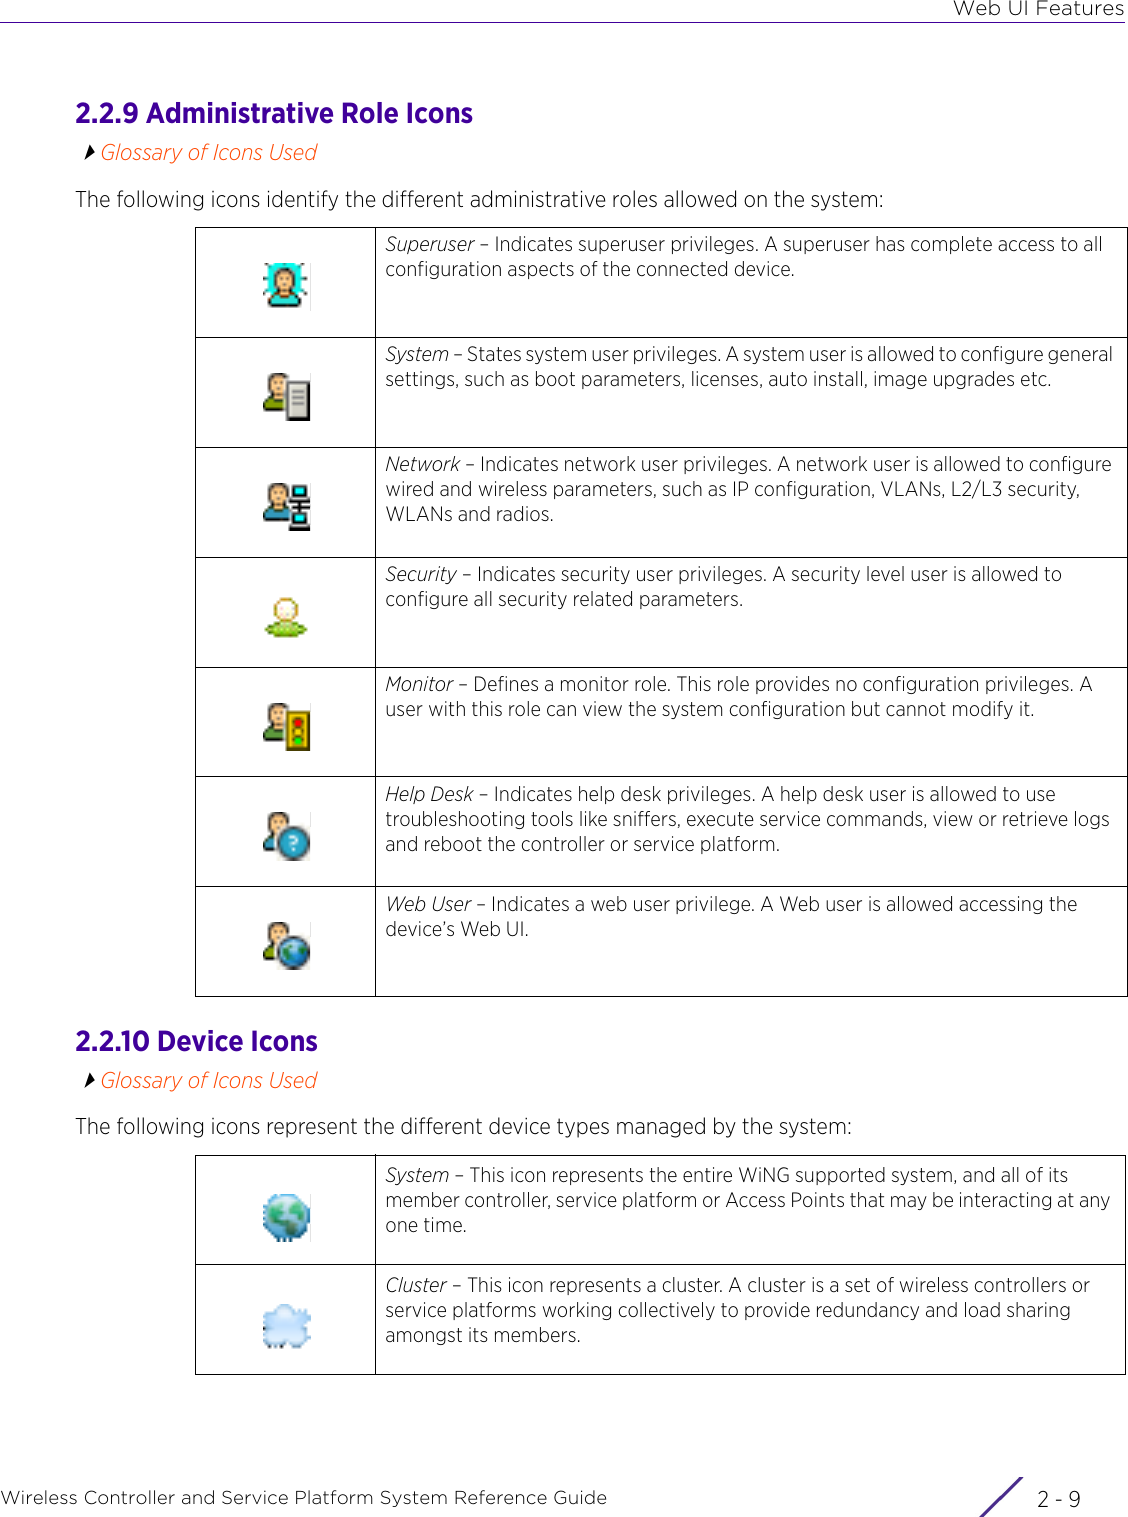 Web UI FeaturesWireless Controller and Service Platform System Reference Guide 2 - 92.2.9 Administrative Role IconsGlossary of Icons UsedThe following icons identify the different administrative roles allowed on the system: 2.2.10 Device IconsGlossary of Icons UsedThe following icons represent the different device types managed by the system:Superuser – Indicates superuser privileges. A superuser has complete access to all configuration aspects of the connected device.System – States system user privileges. A system user is allowed to configure general settings, such as boot parameters, licenses, auto install, image upgrades etc.Network – Indicates network user privileges. A network user is allowed to configure wired and wireless parameters, such as IP configuration, VLANs, L2/L3 security, WLANs and radios.Security – Indicates security user privileges. A security level user is allowed to configure all security related parameters.Monitor – Defines a monitor role. This role provides no configuration privileges. A user with this role can view the system configuration but cannot modify it.Help Desk – Indicates help desk privileges. A help desk user is allowed to use troubleshooting tools like sniffers, execute service commands, view or retrieve logs and reboot the controller or service platform.Web User – Indicates a web user privilege. A Web user is allowed accessing the device’s Web UI.System – This icon represents the entire WiNG supported system, and all of its member controller, service platform or Access Points that may be interacting at any one time.Cluster – This icon represents a cluster. A cluster is a set of wireless controllers or service platforms working collectively to provide redundancy and load sharing amongst its members.